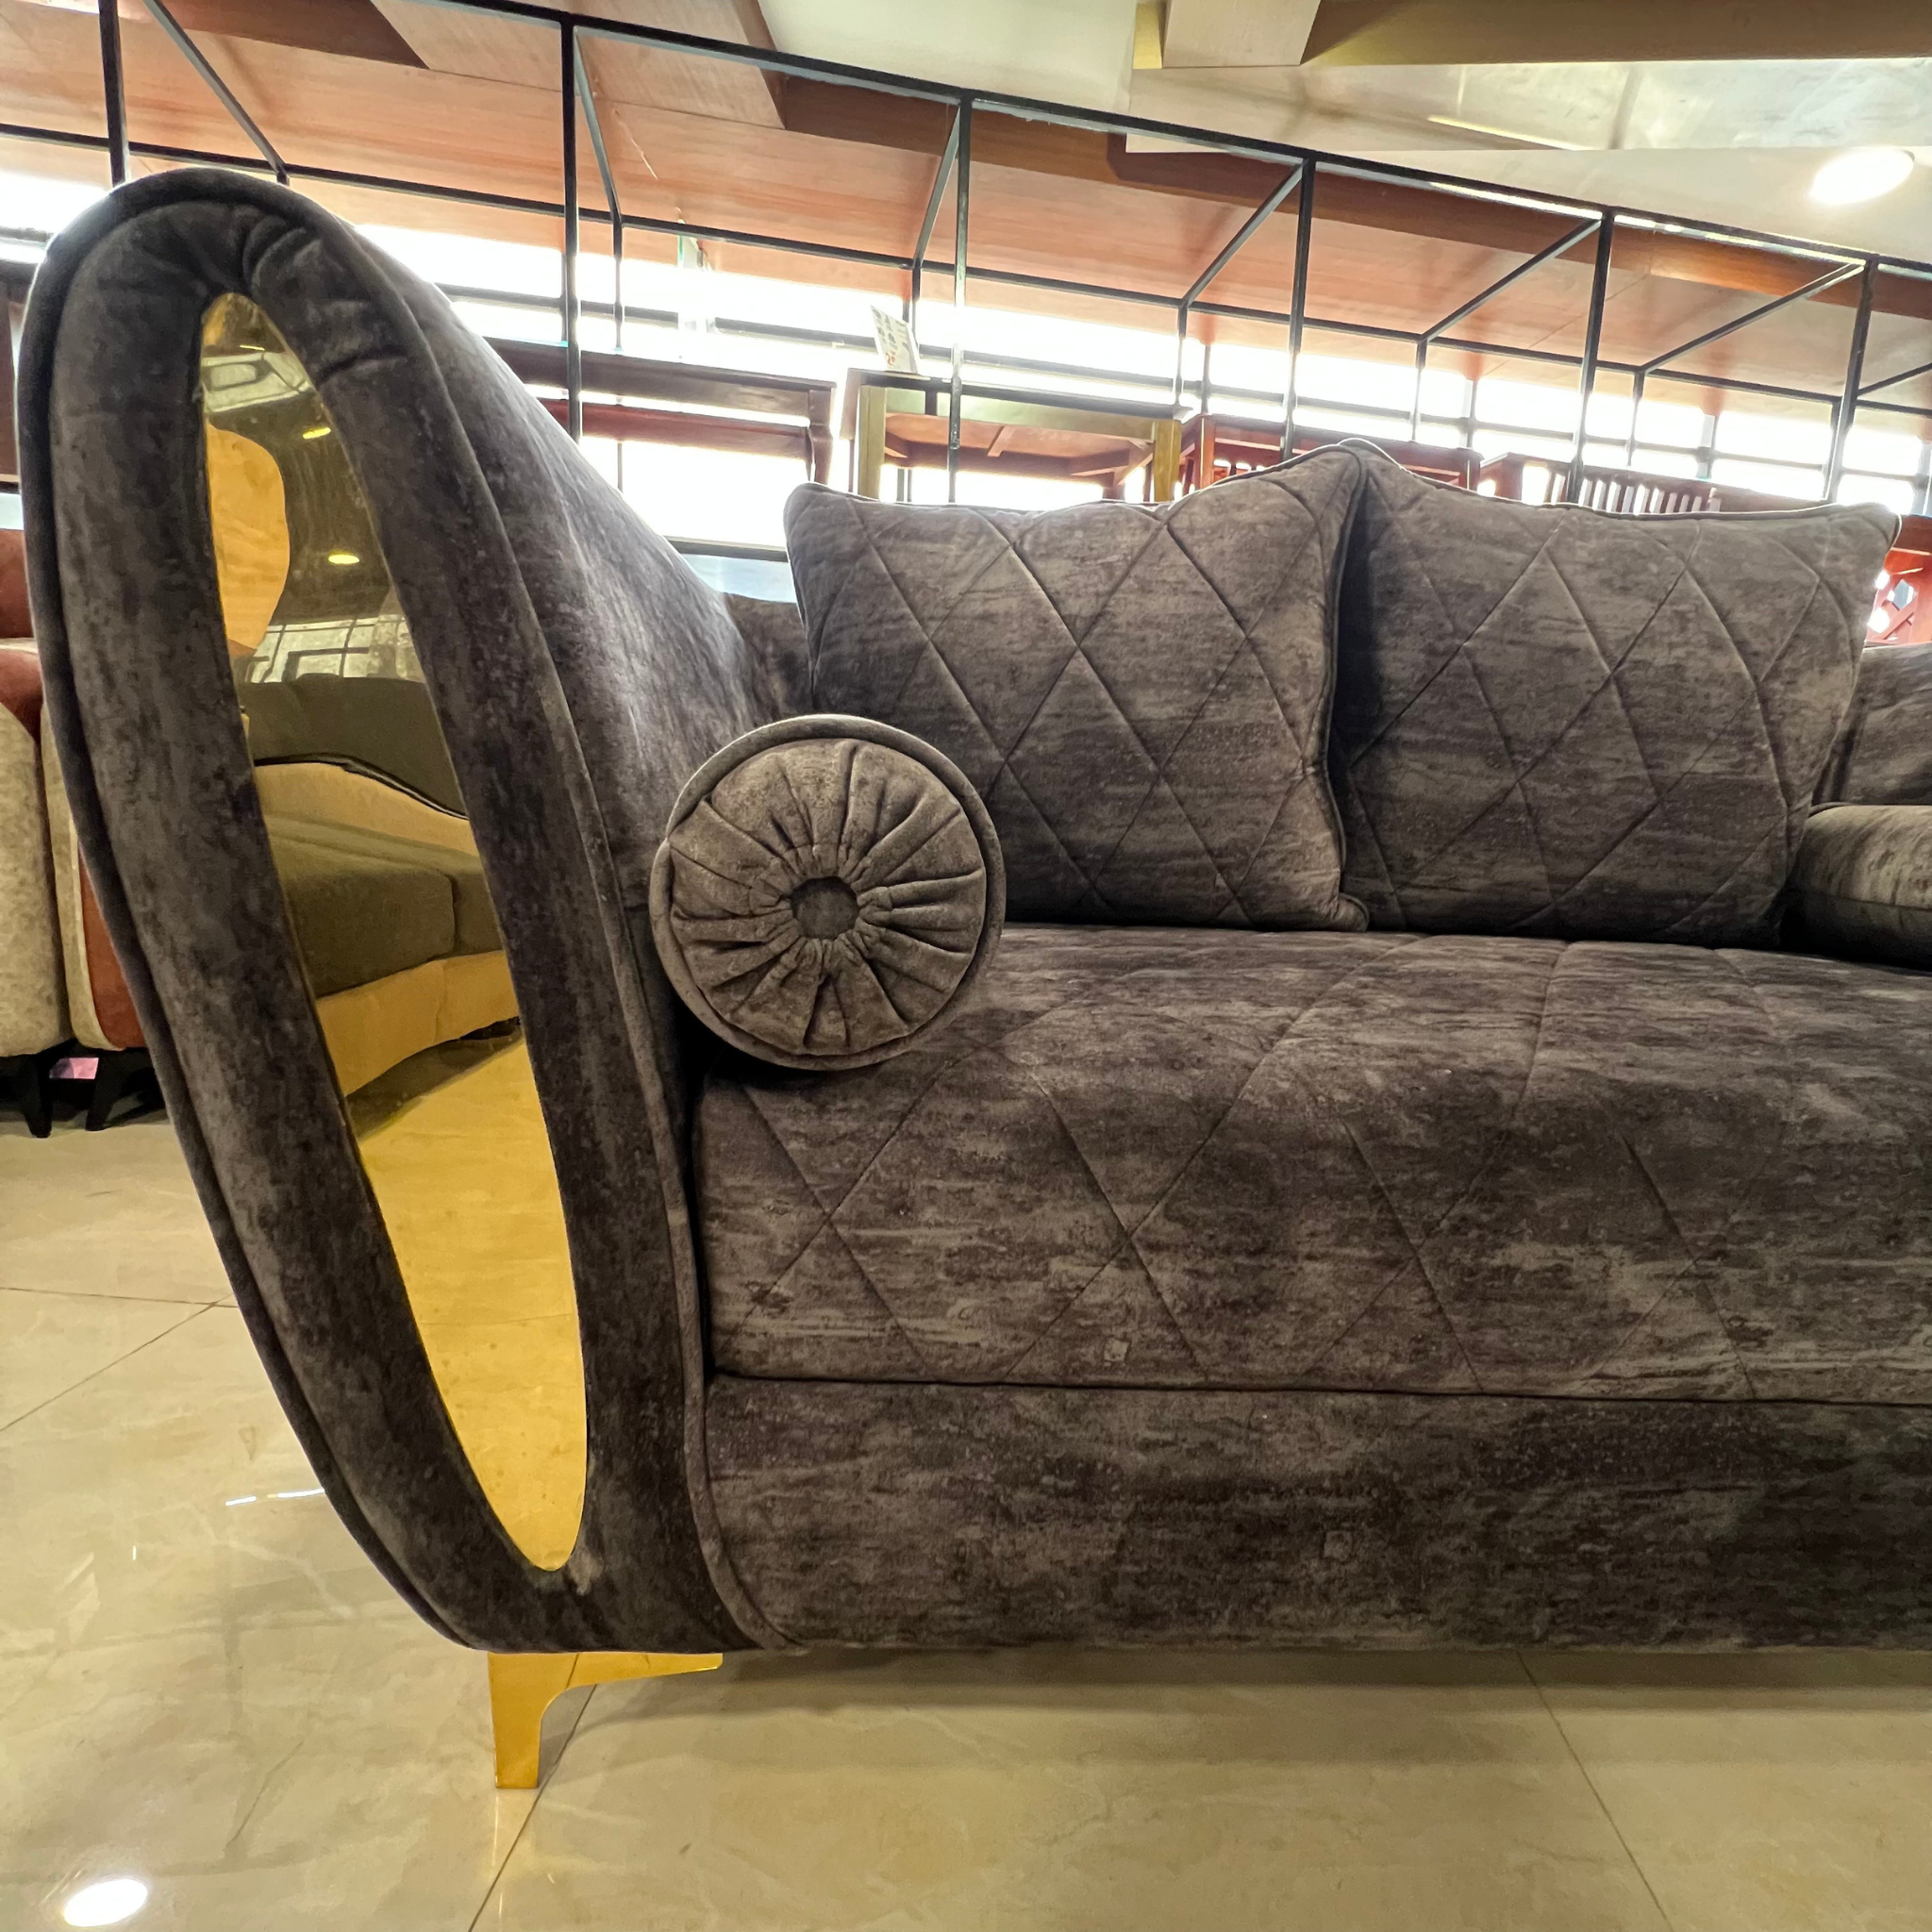 Oyster Sofa